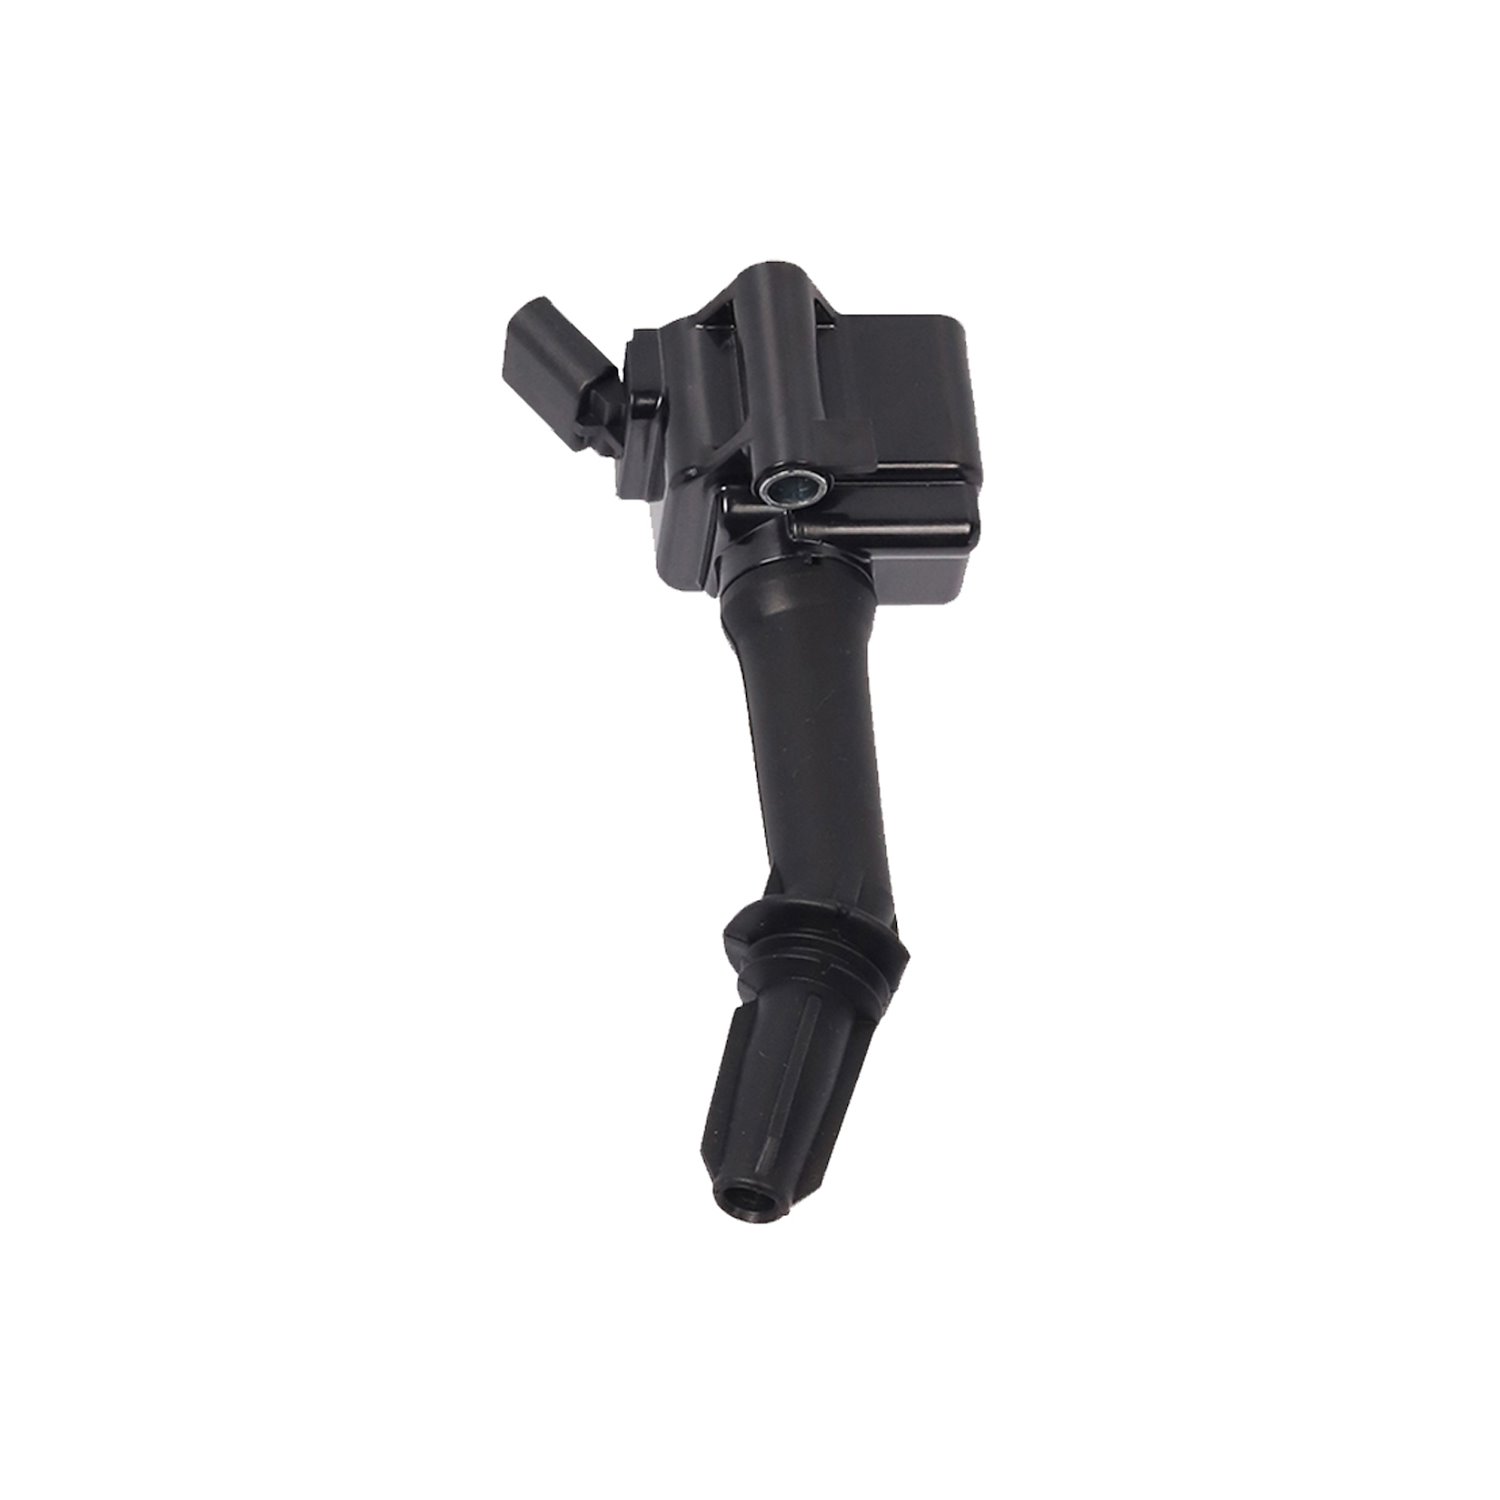 OE Replacement Ignition Coil for Turbocharged Chevrolet Malibu, Cruze, Buick Encore